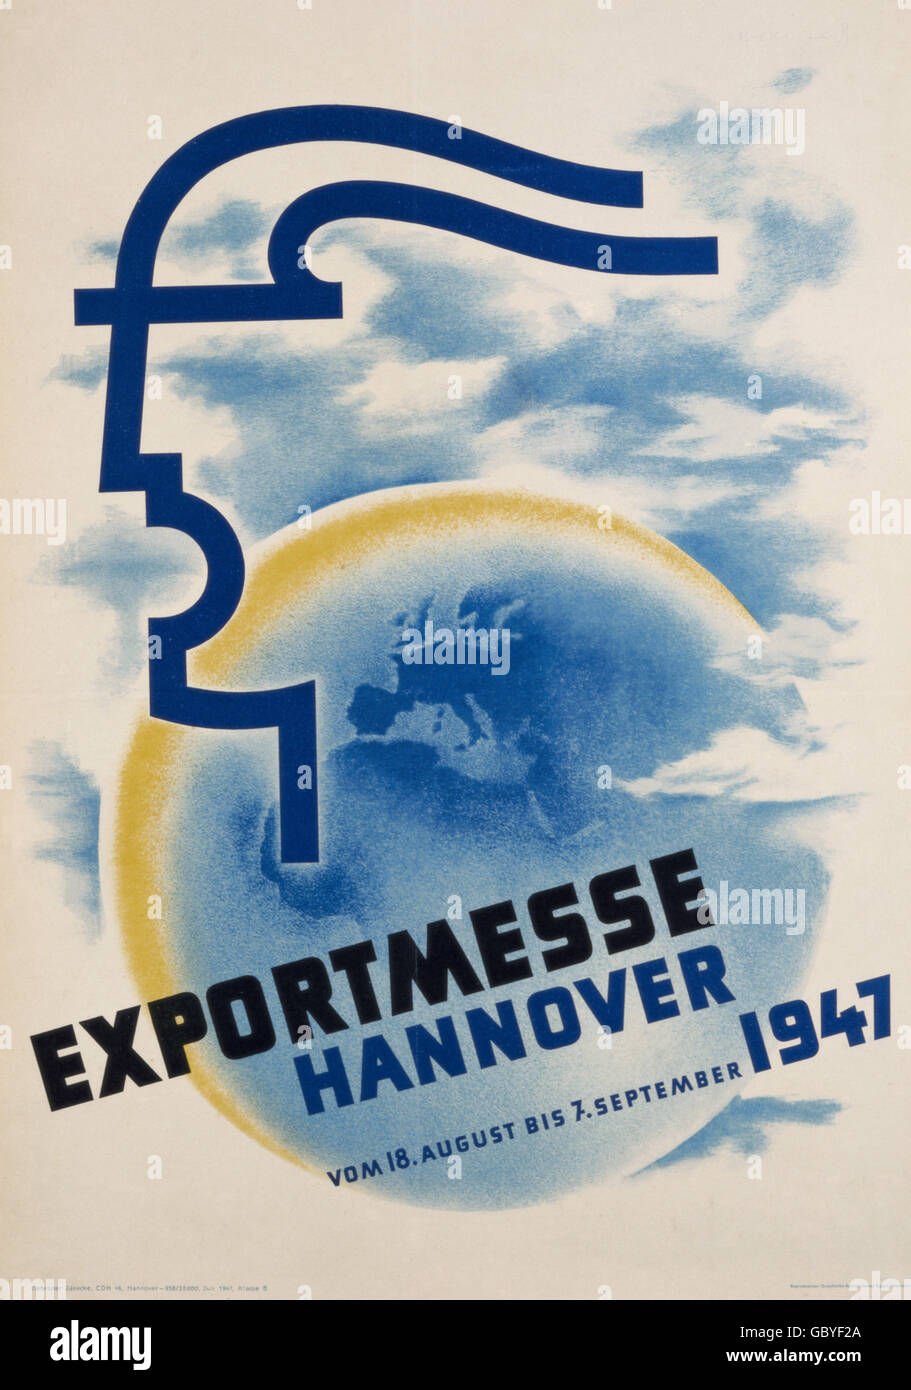 exhibitions, Hanover Export Fair, poster, 18th fair, 18.8. - 7.9.1947, Additional-Rights-Clearences-Not Available Stock Photo